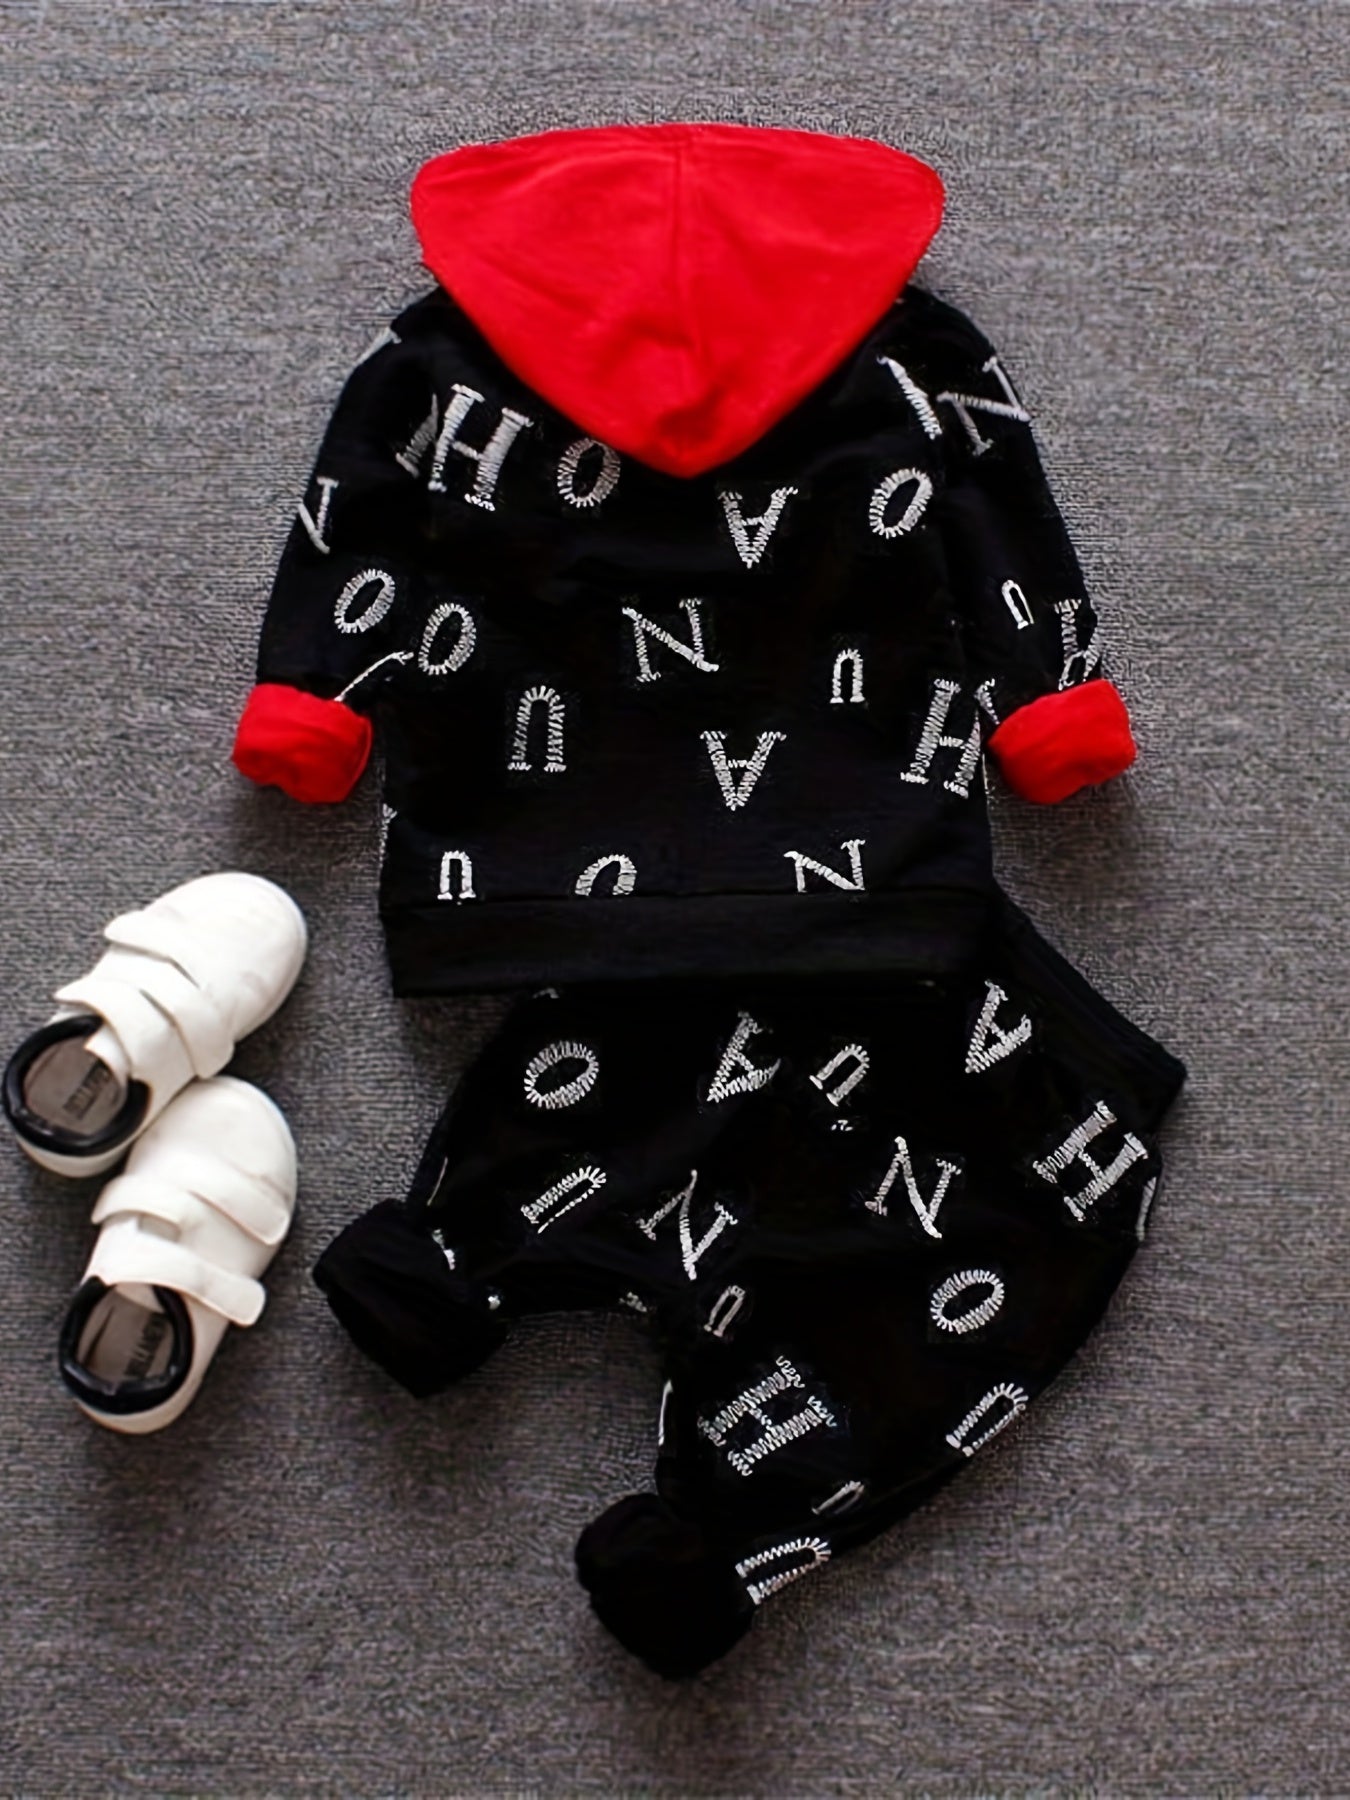 Boys Spring And Autumn New Long-sleeved Suit Baby Boy Letter Print Top Coat Pants Set Children's Fashion Casual Suit